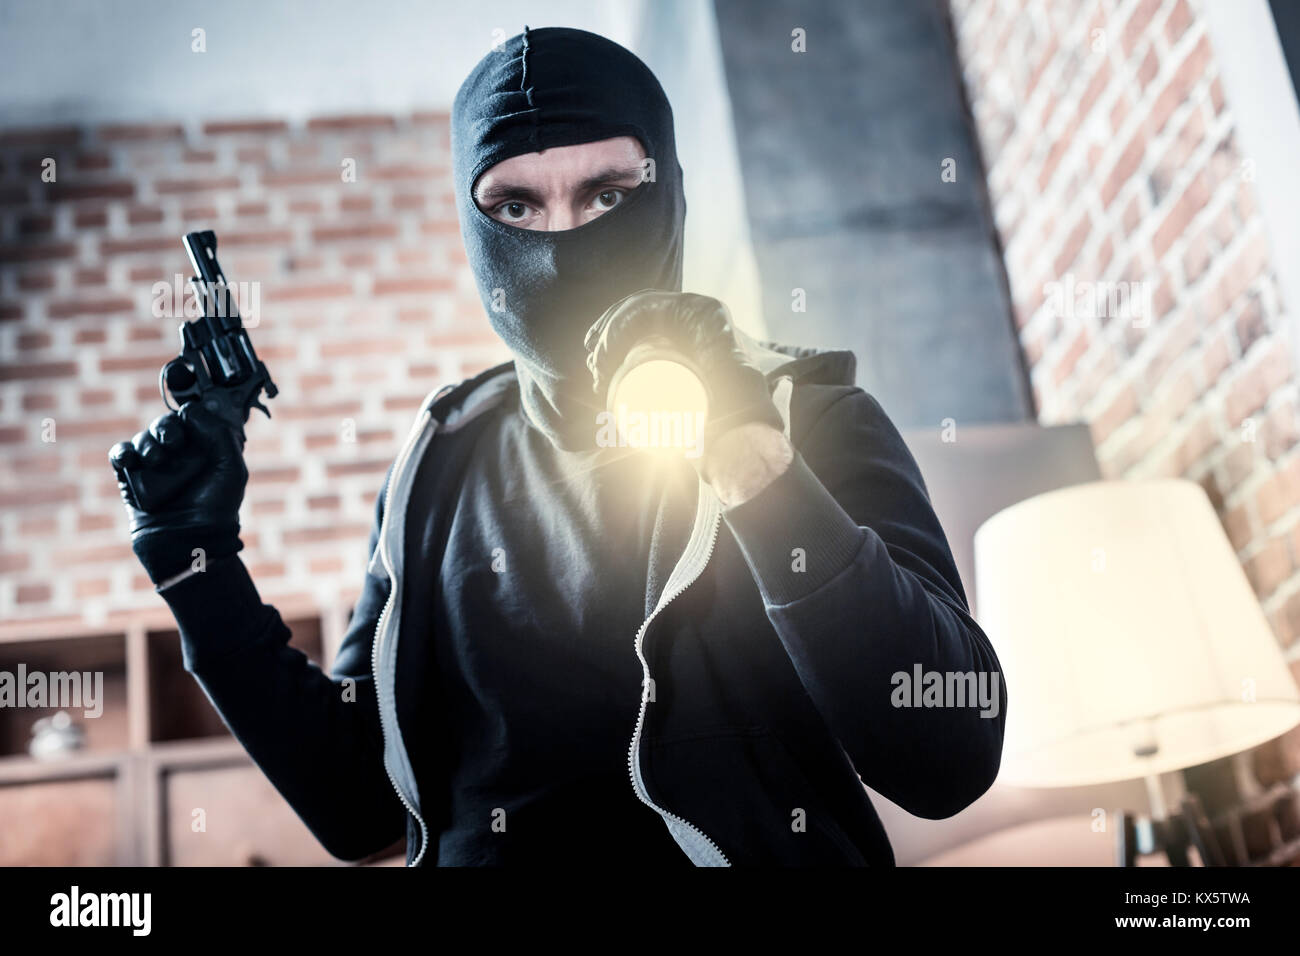 Enraged criminal holding a gun and a torch Stock Photo